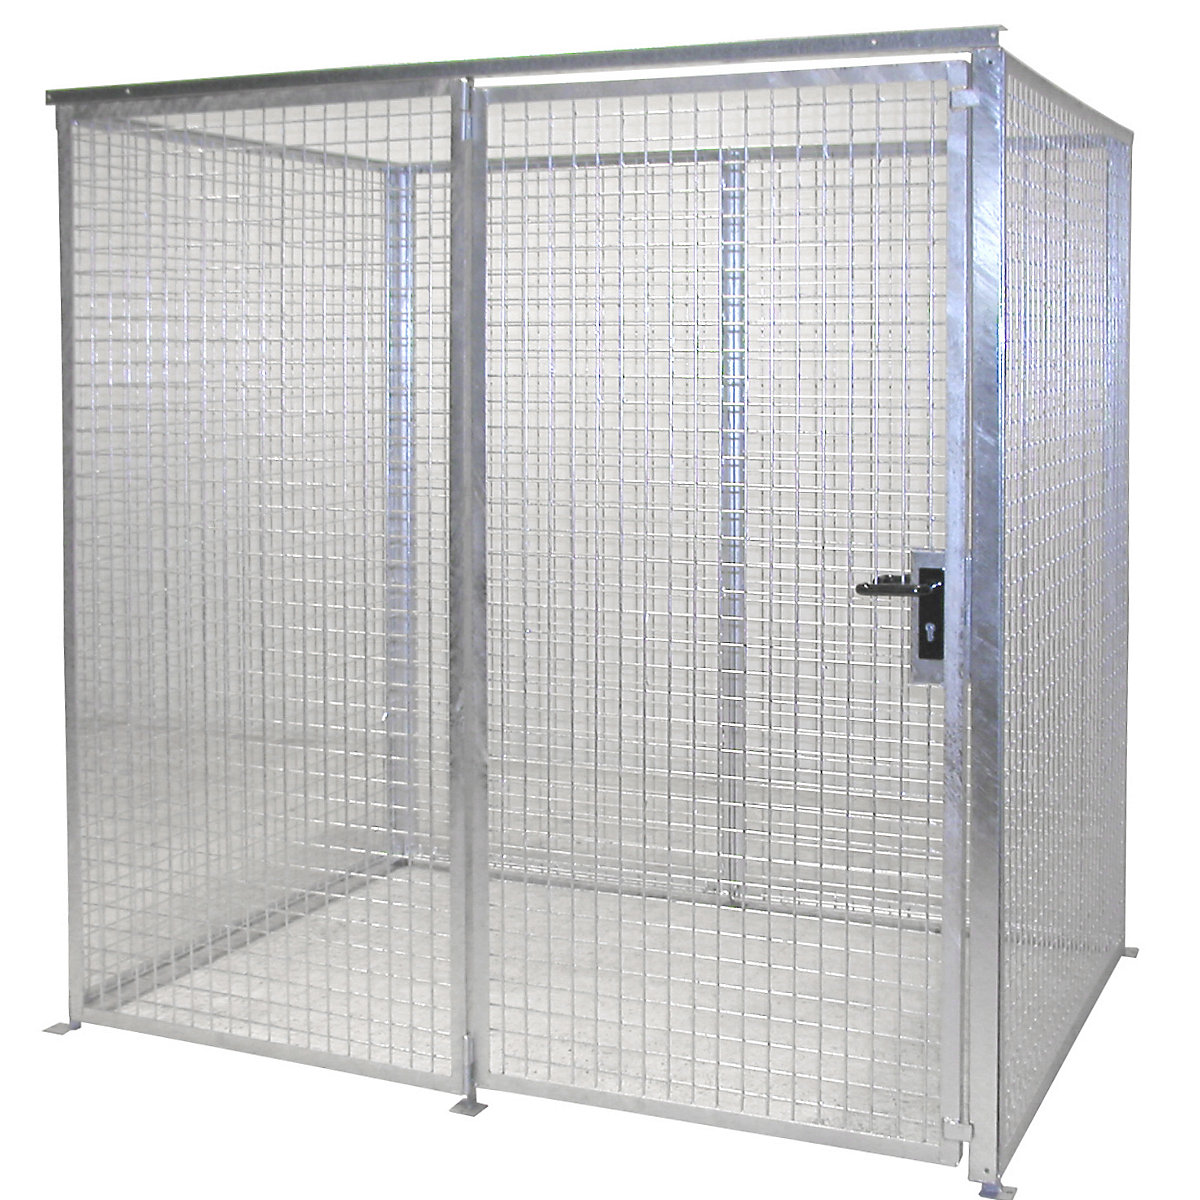 EUROKRAFTpro – Mesh gas cylinder cage, without roof, with single hinged door, WxD 2100 x 1500 mm